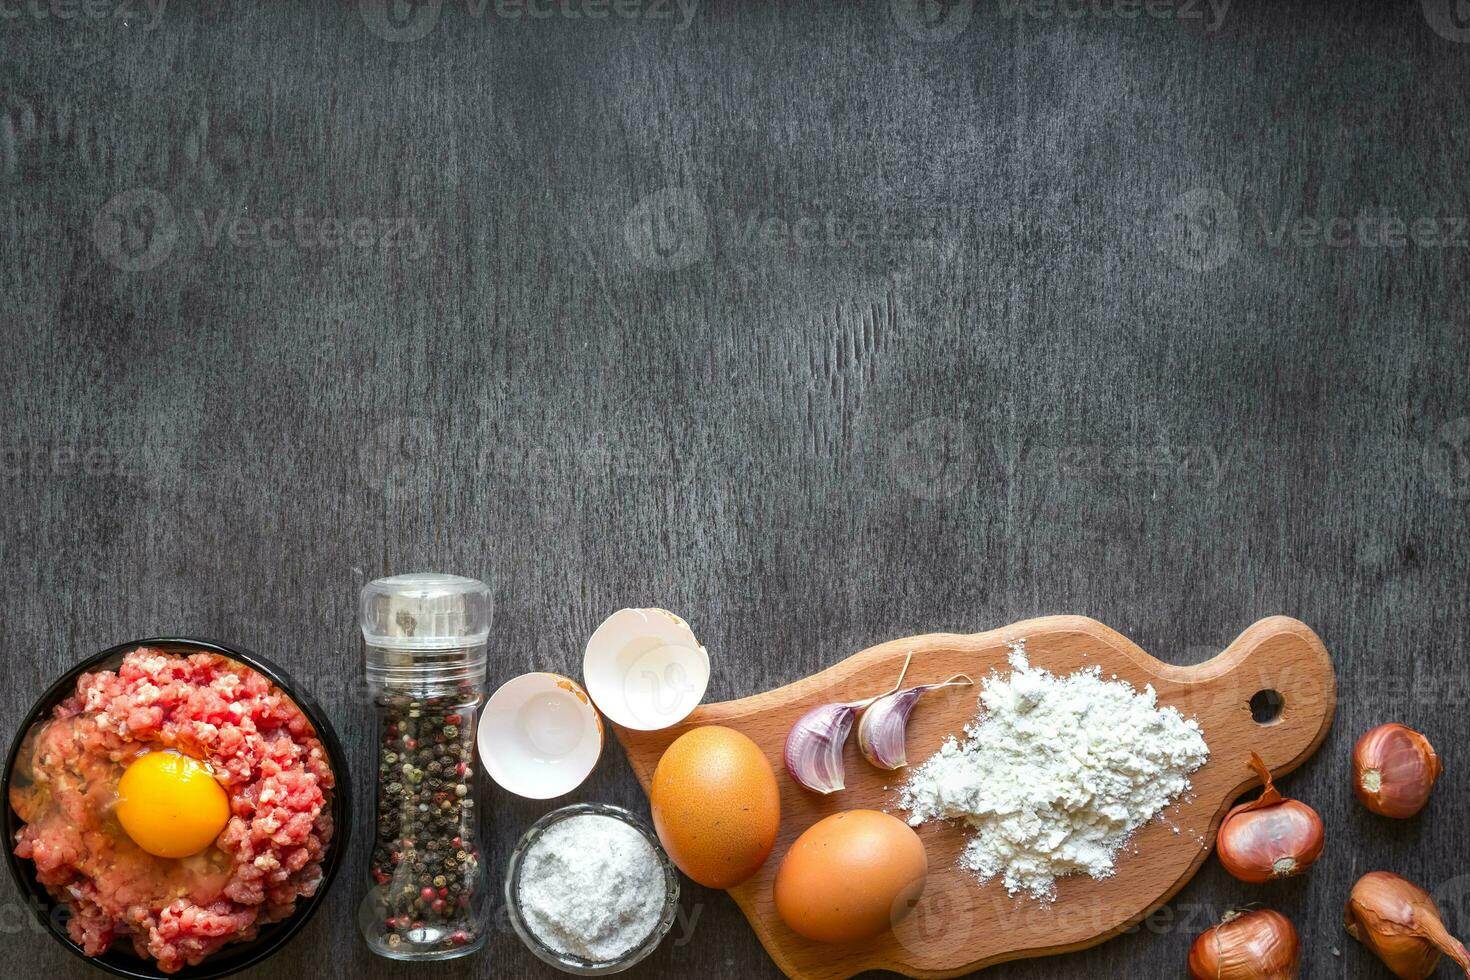 Raw minced meat with egg yolk, wooden cutting board on wooden background photo